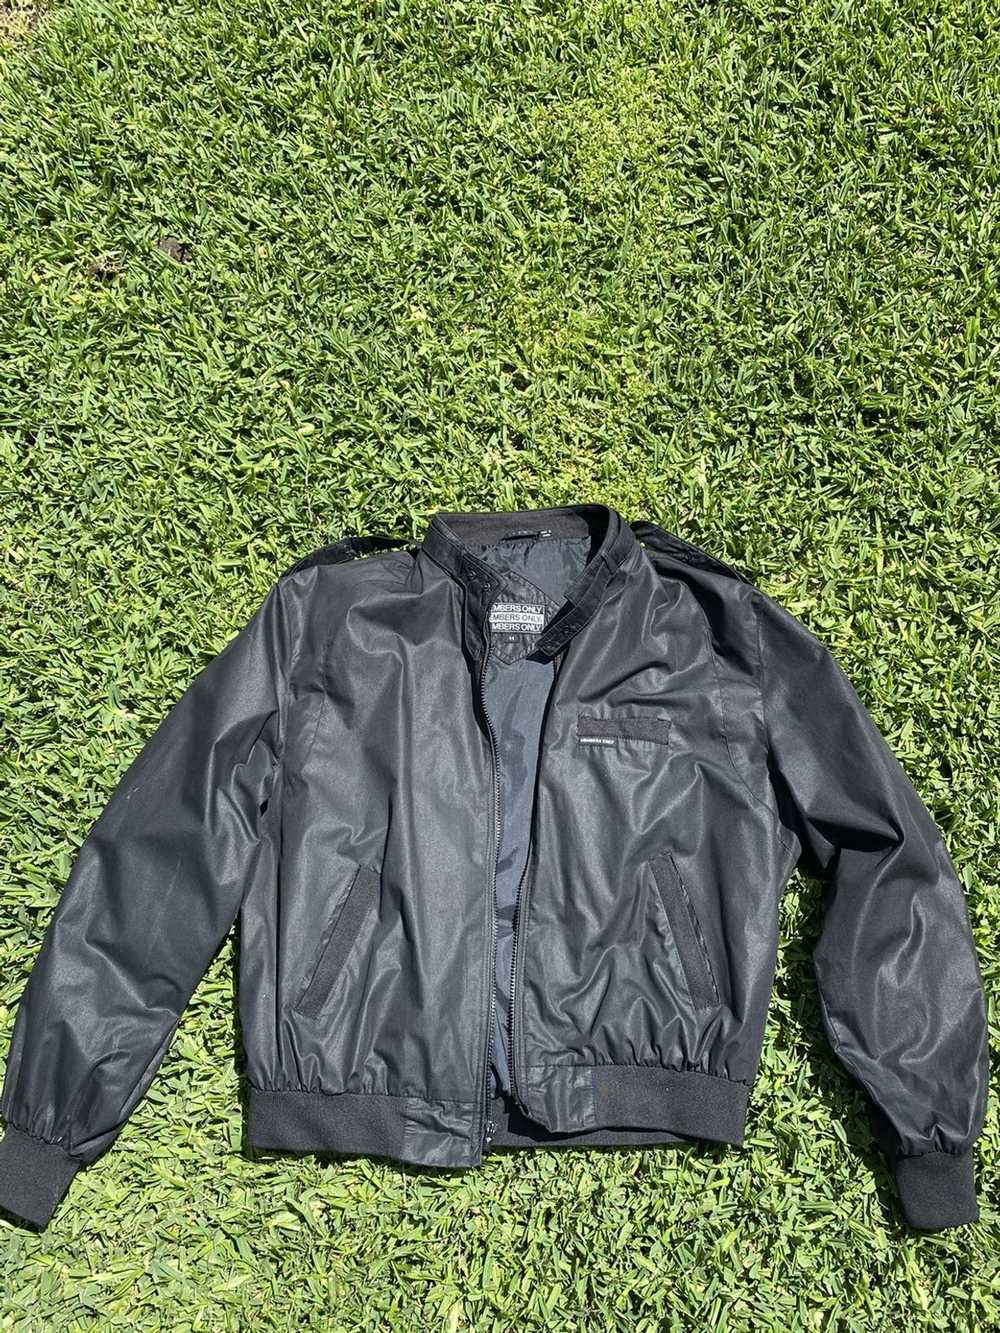 TheAstronautsWife Vintage 80s Black Members Only Jacket Size XL